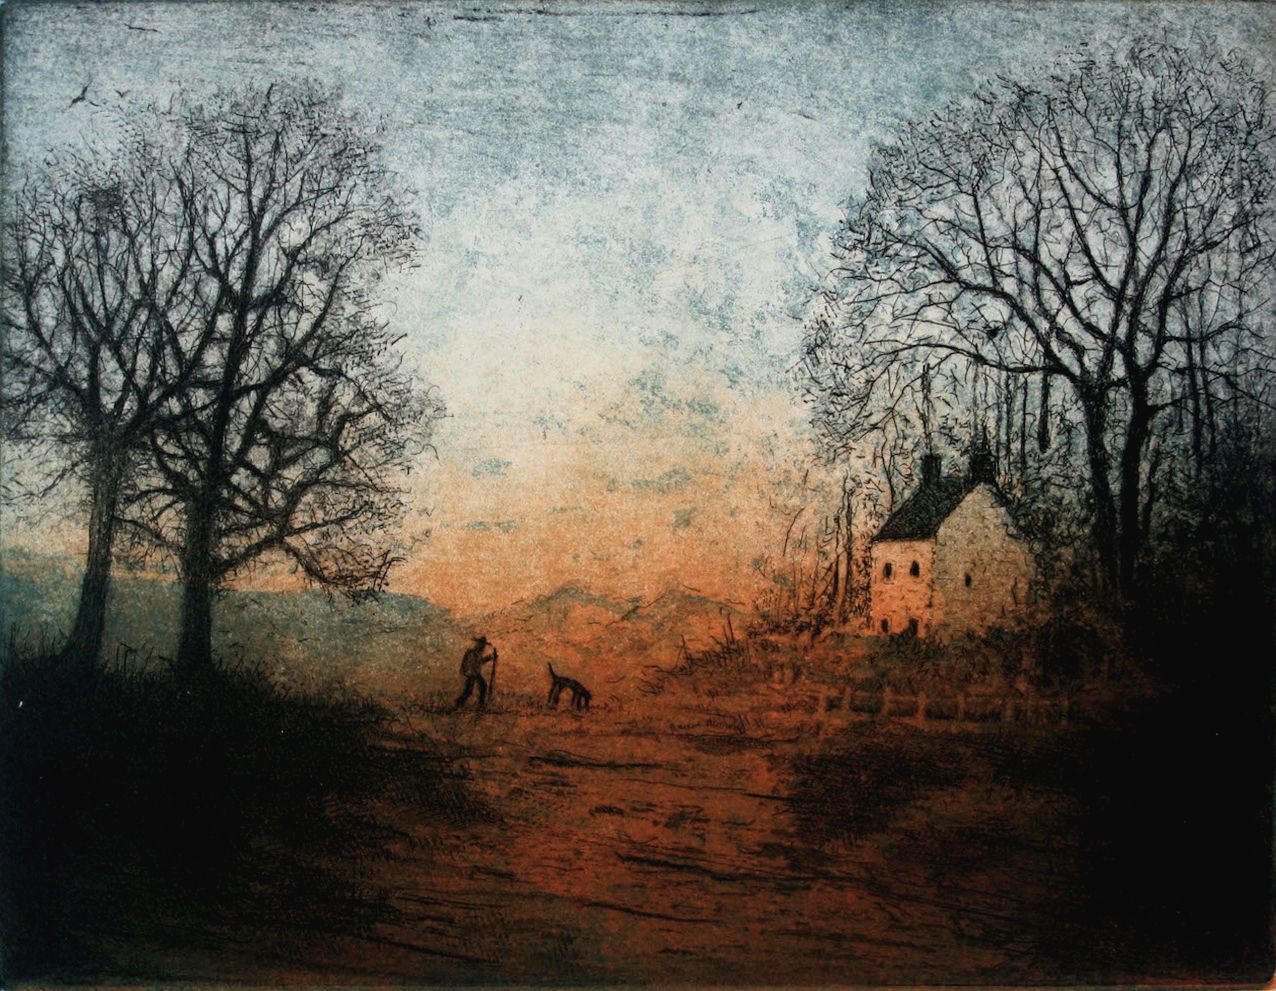 Coming Home, Tim Southall, Print, Landscape by Tim Southall